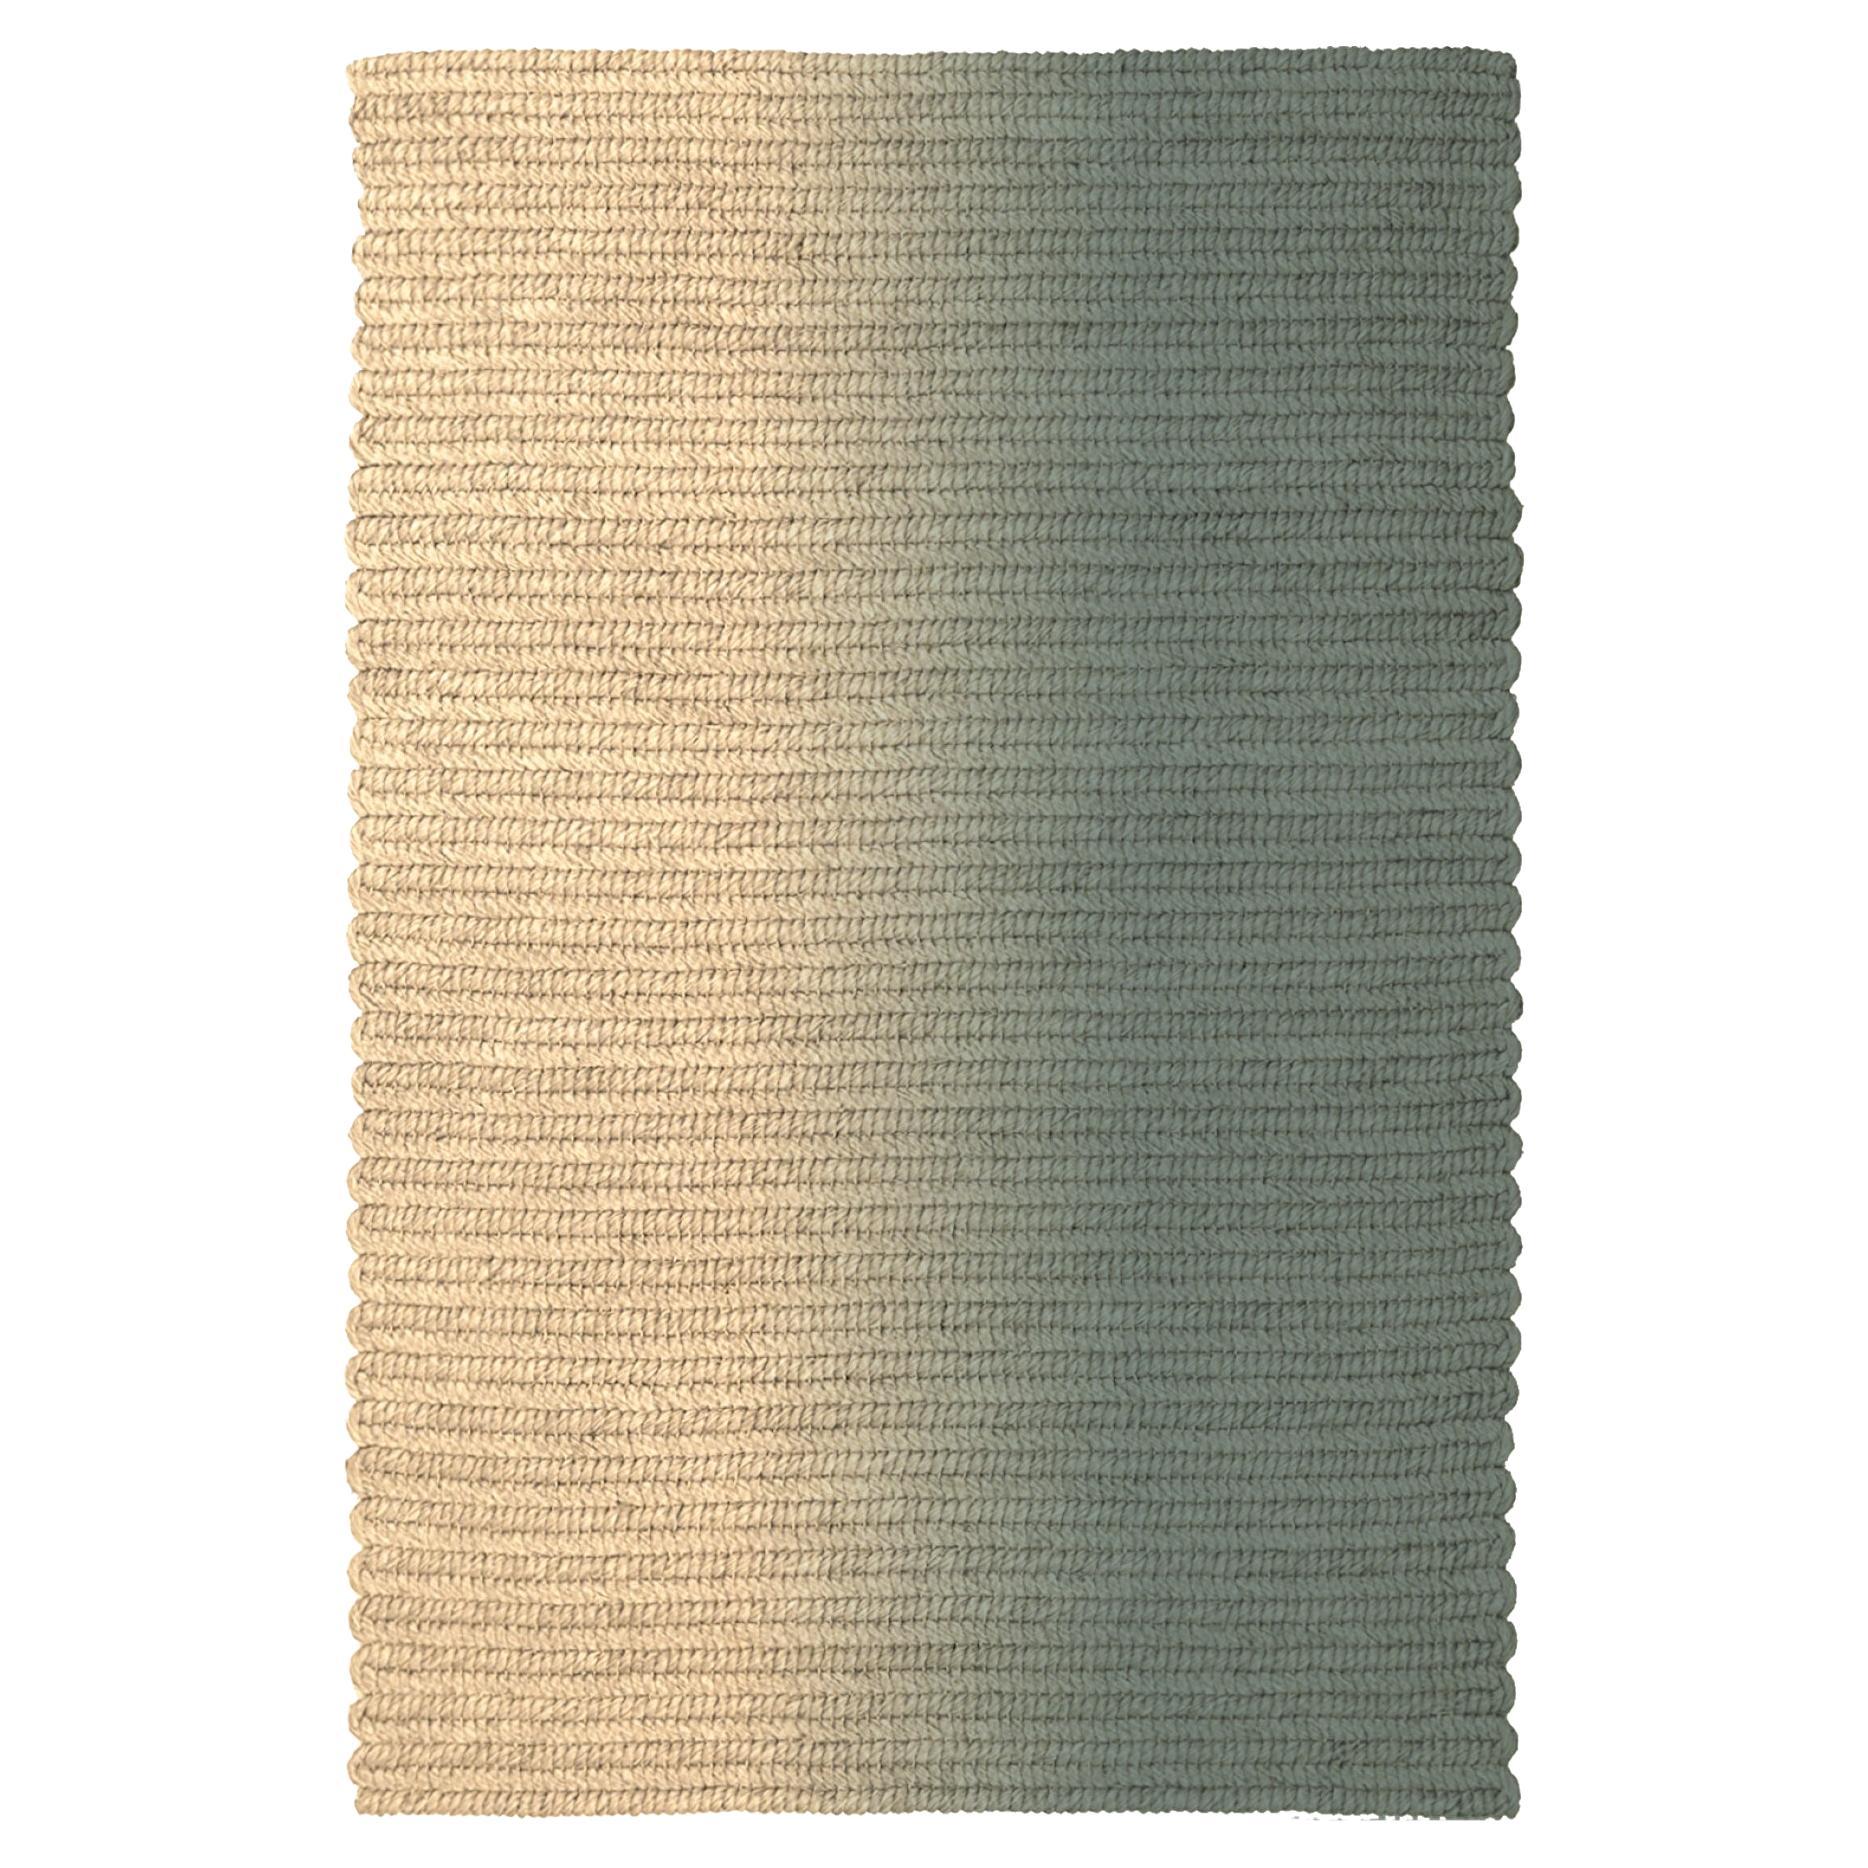 'Switch' Rug in Abaca, Caffe Latte, by Claire Vos for Musett Design For Sale